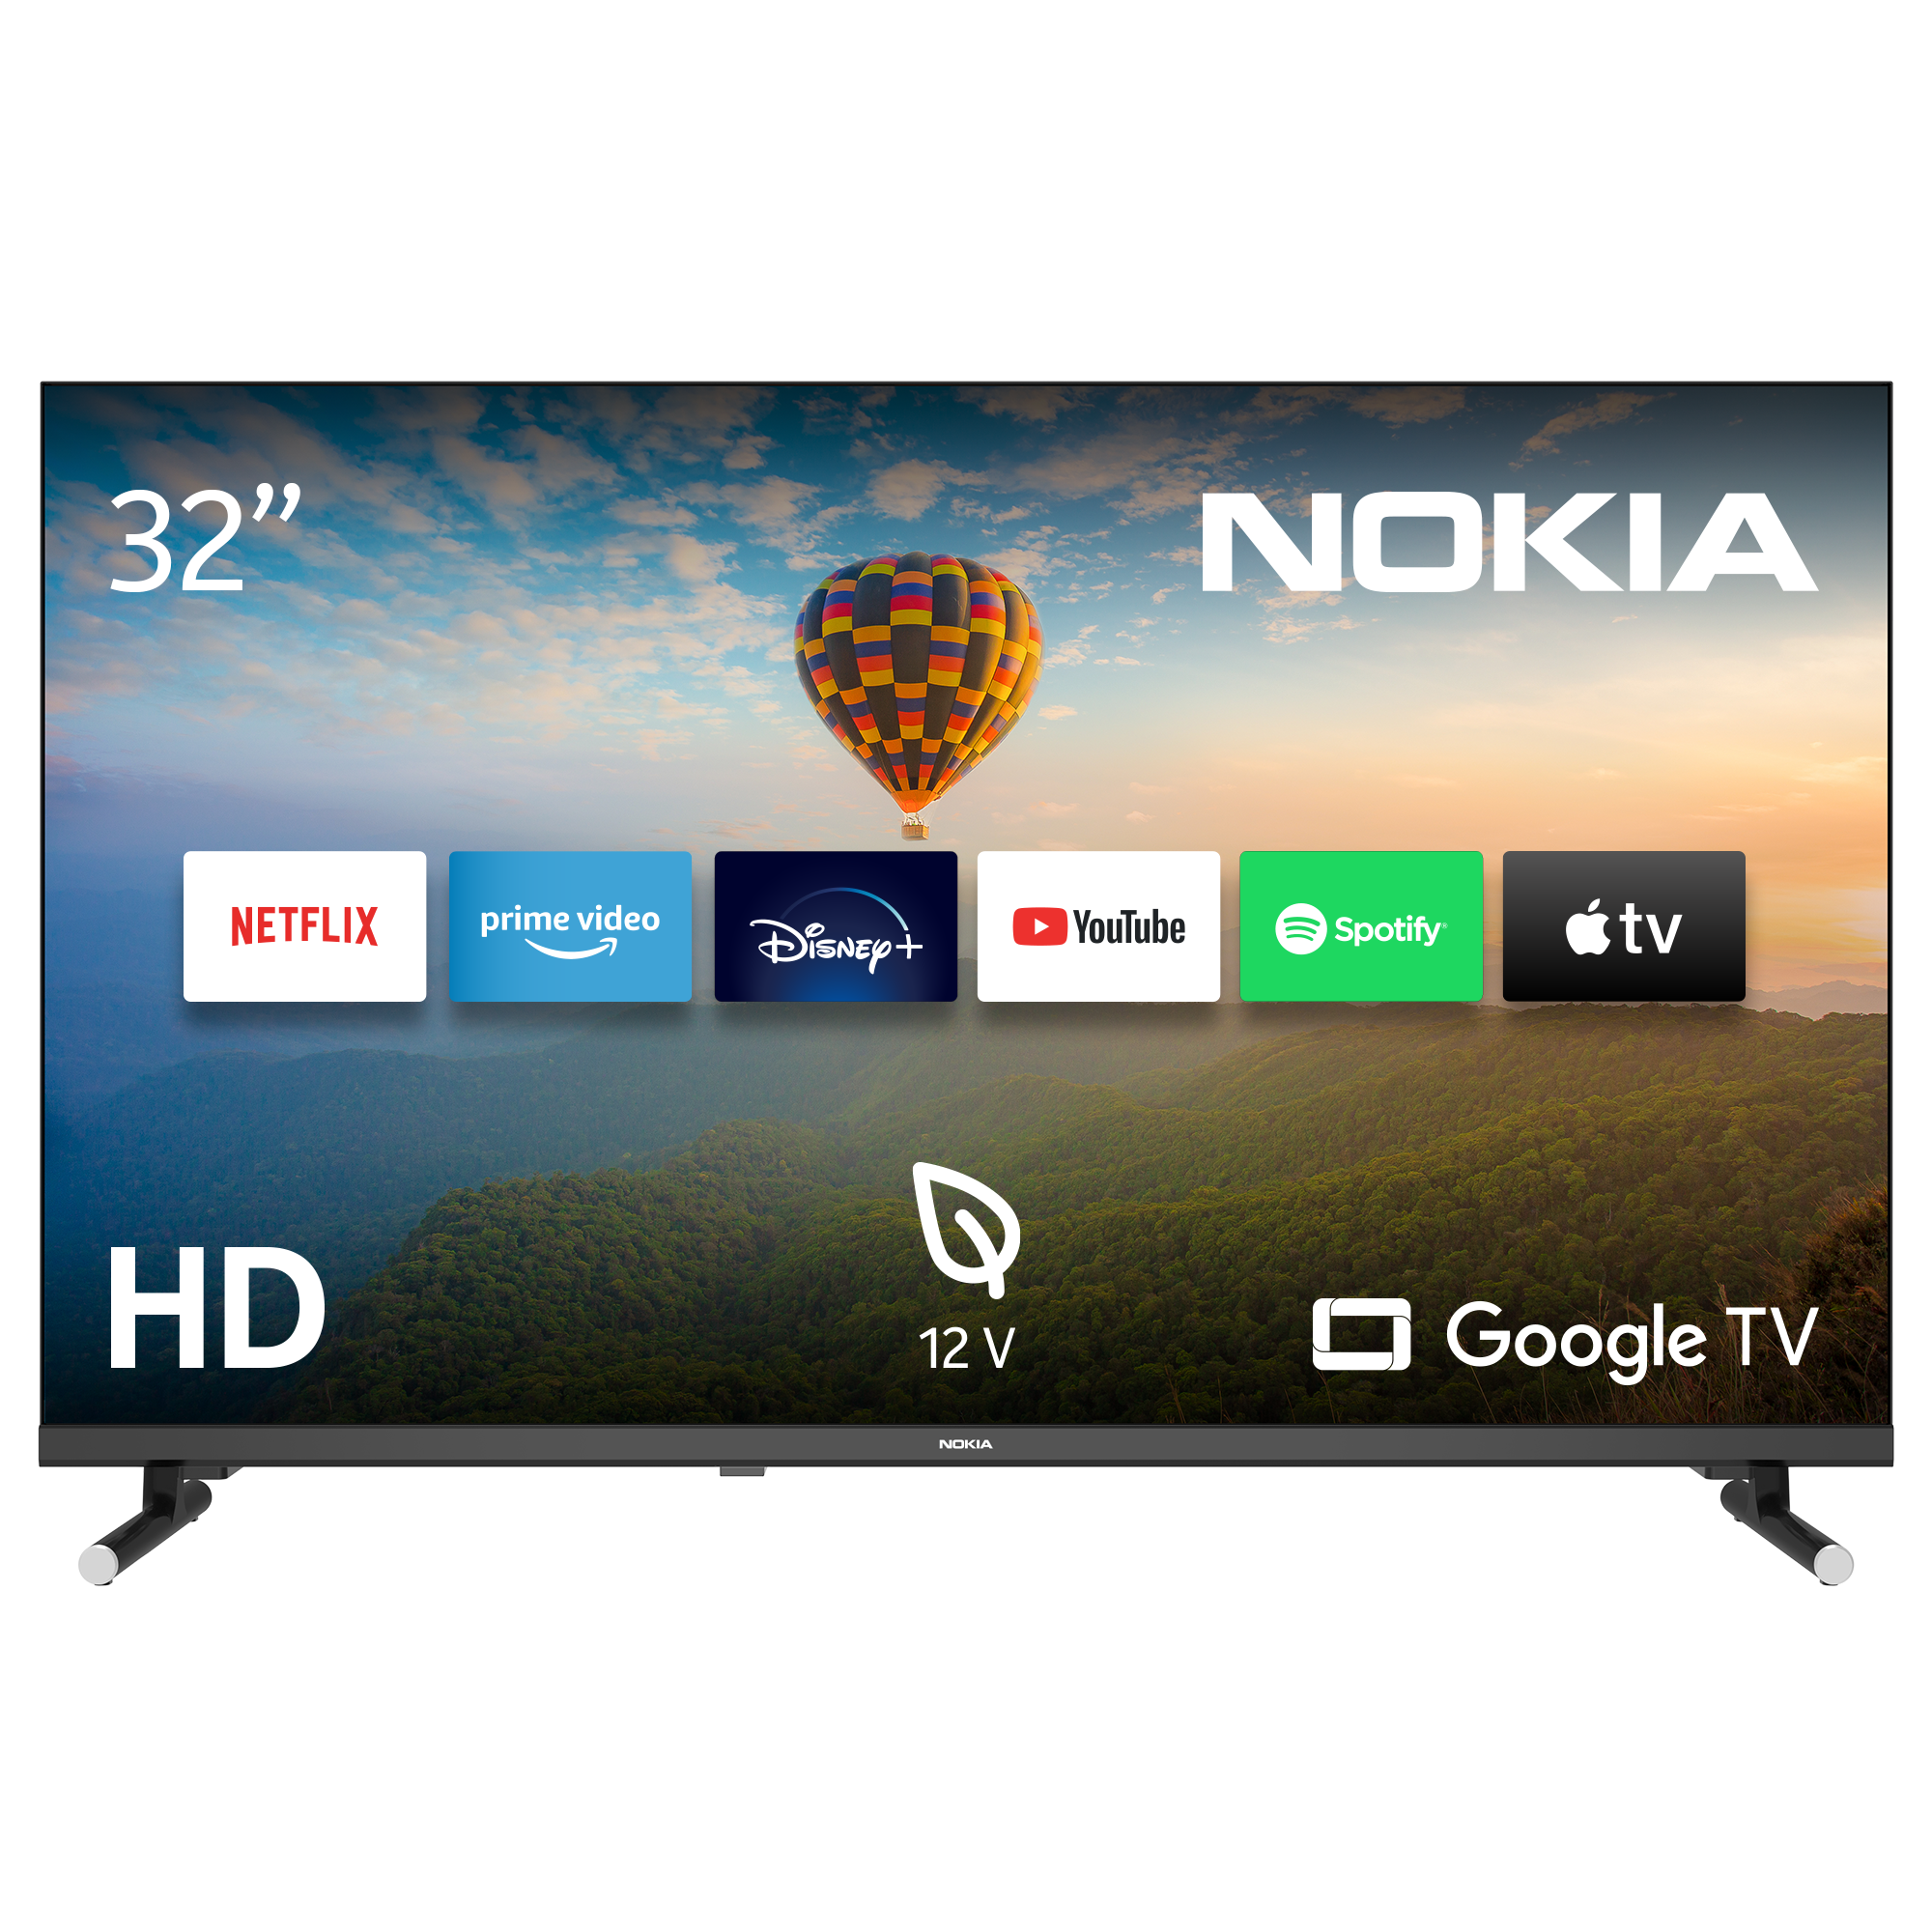 NOKIA HN32GE320C cm, / Android) TV 81 32 TV, LED (Flat, HD, Zoll SMART